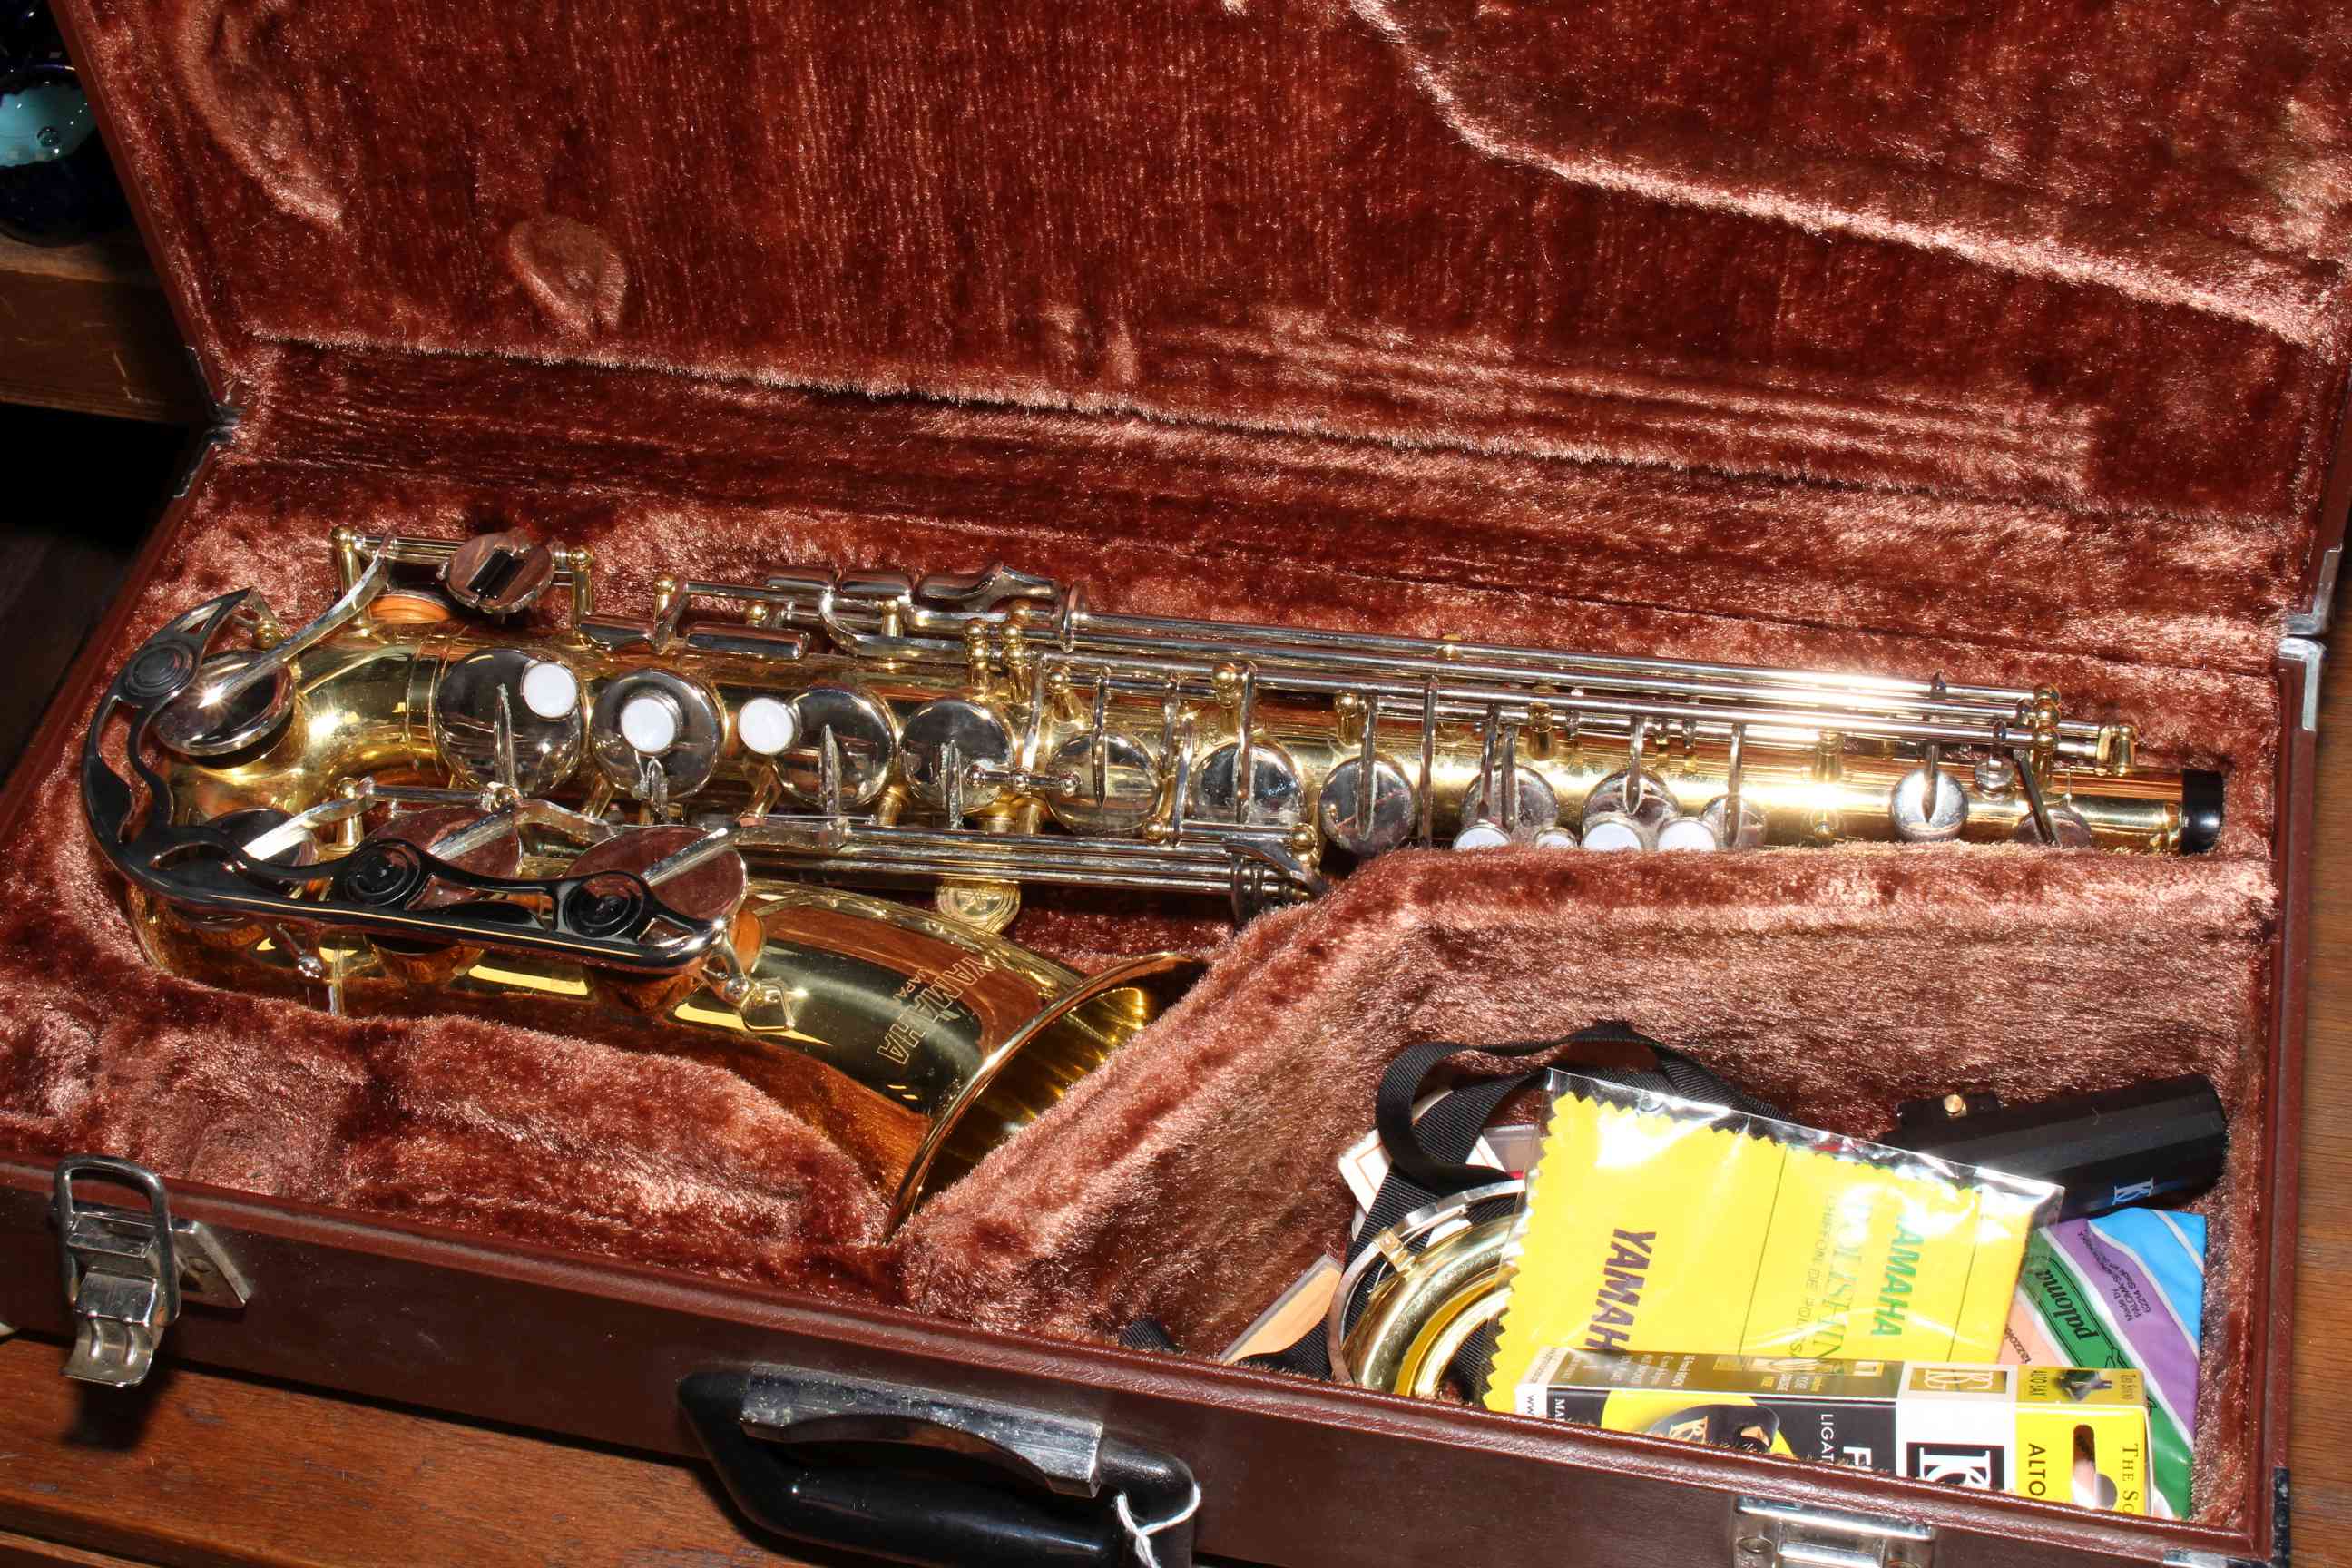 Yamaha YAS-25 015171 alto saxophone, made in Japan, with case.